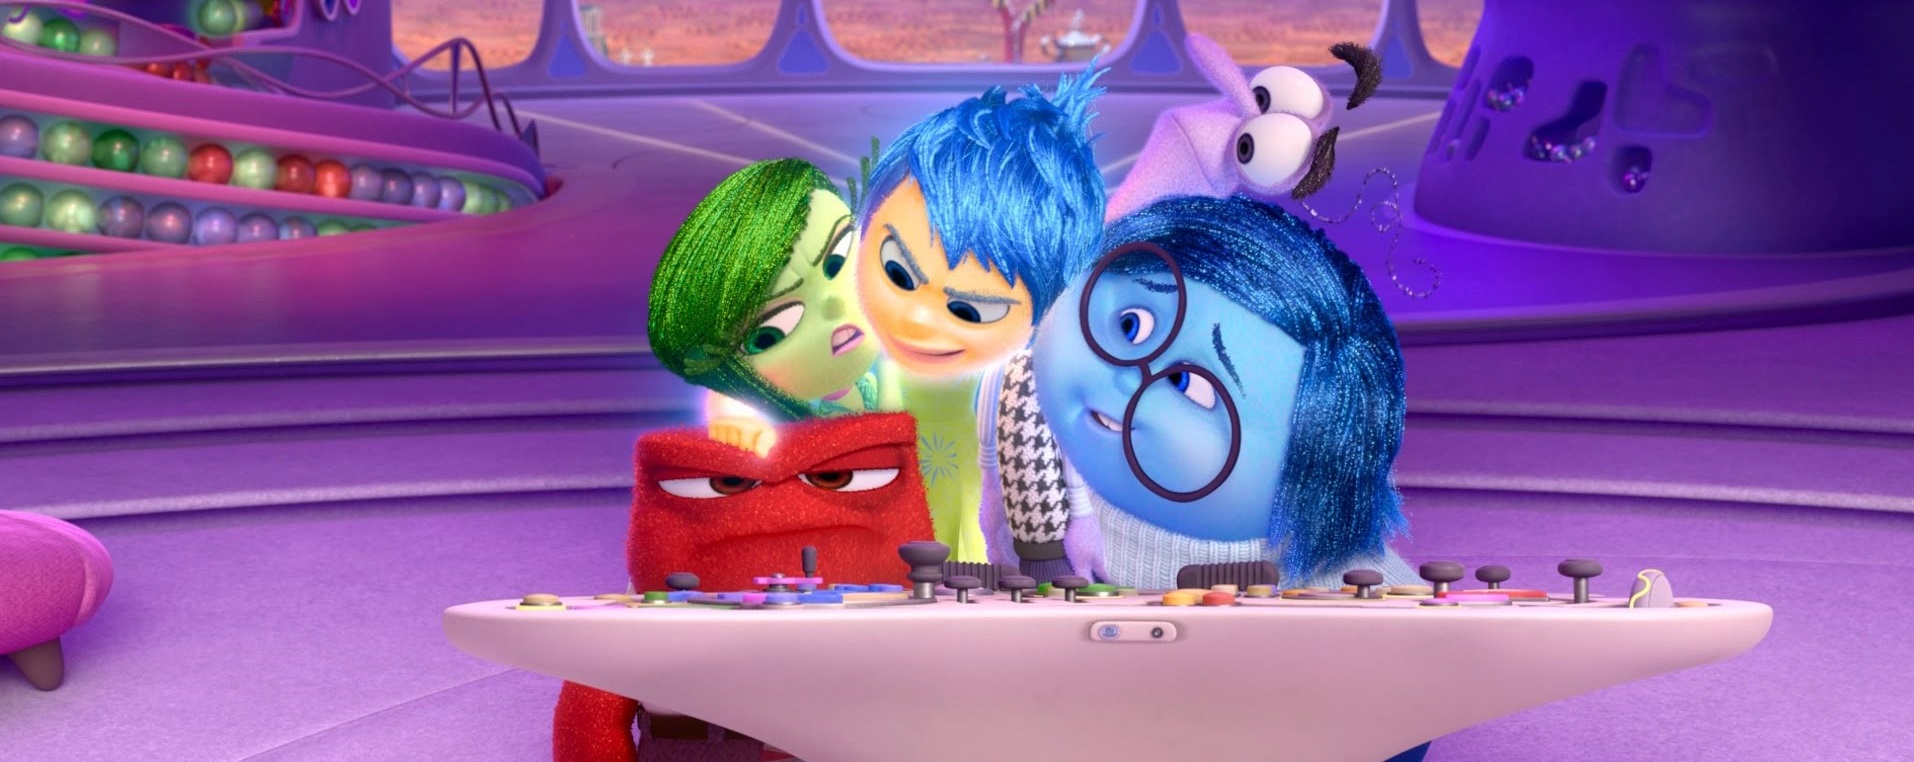 inside out - film 201 i migliori film pills of movies